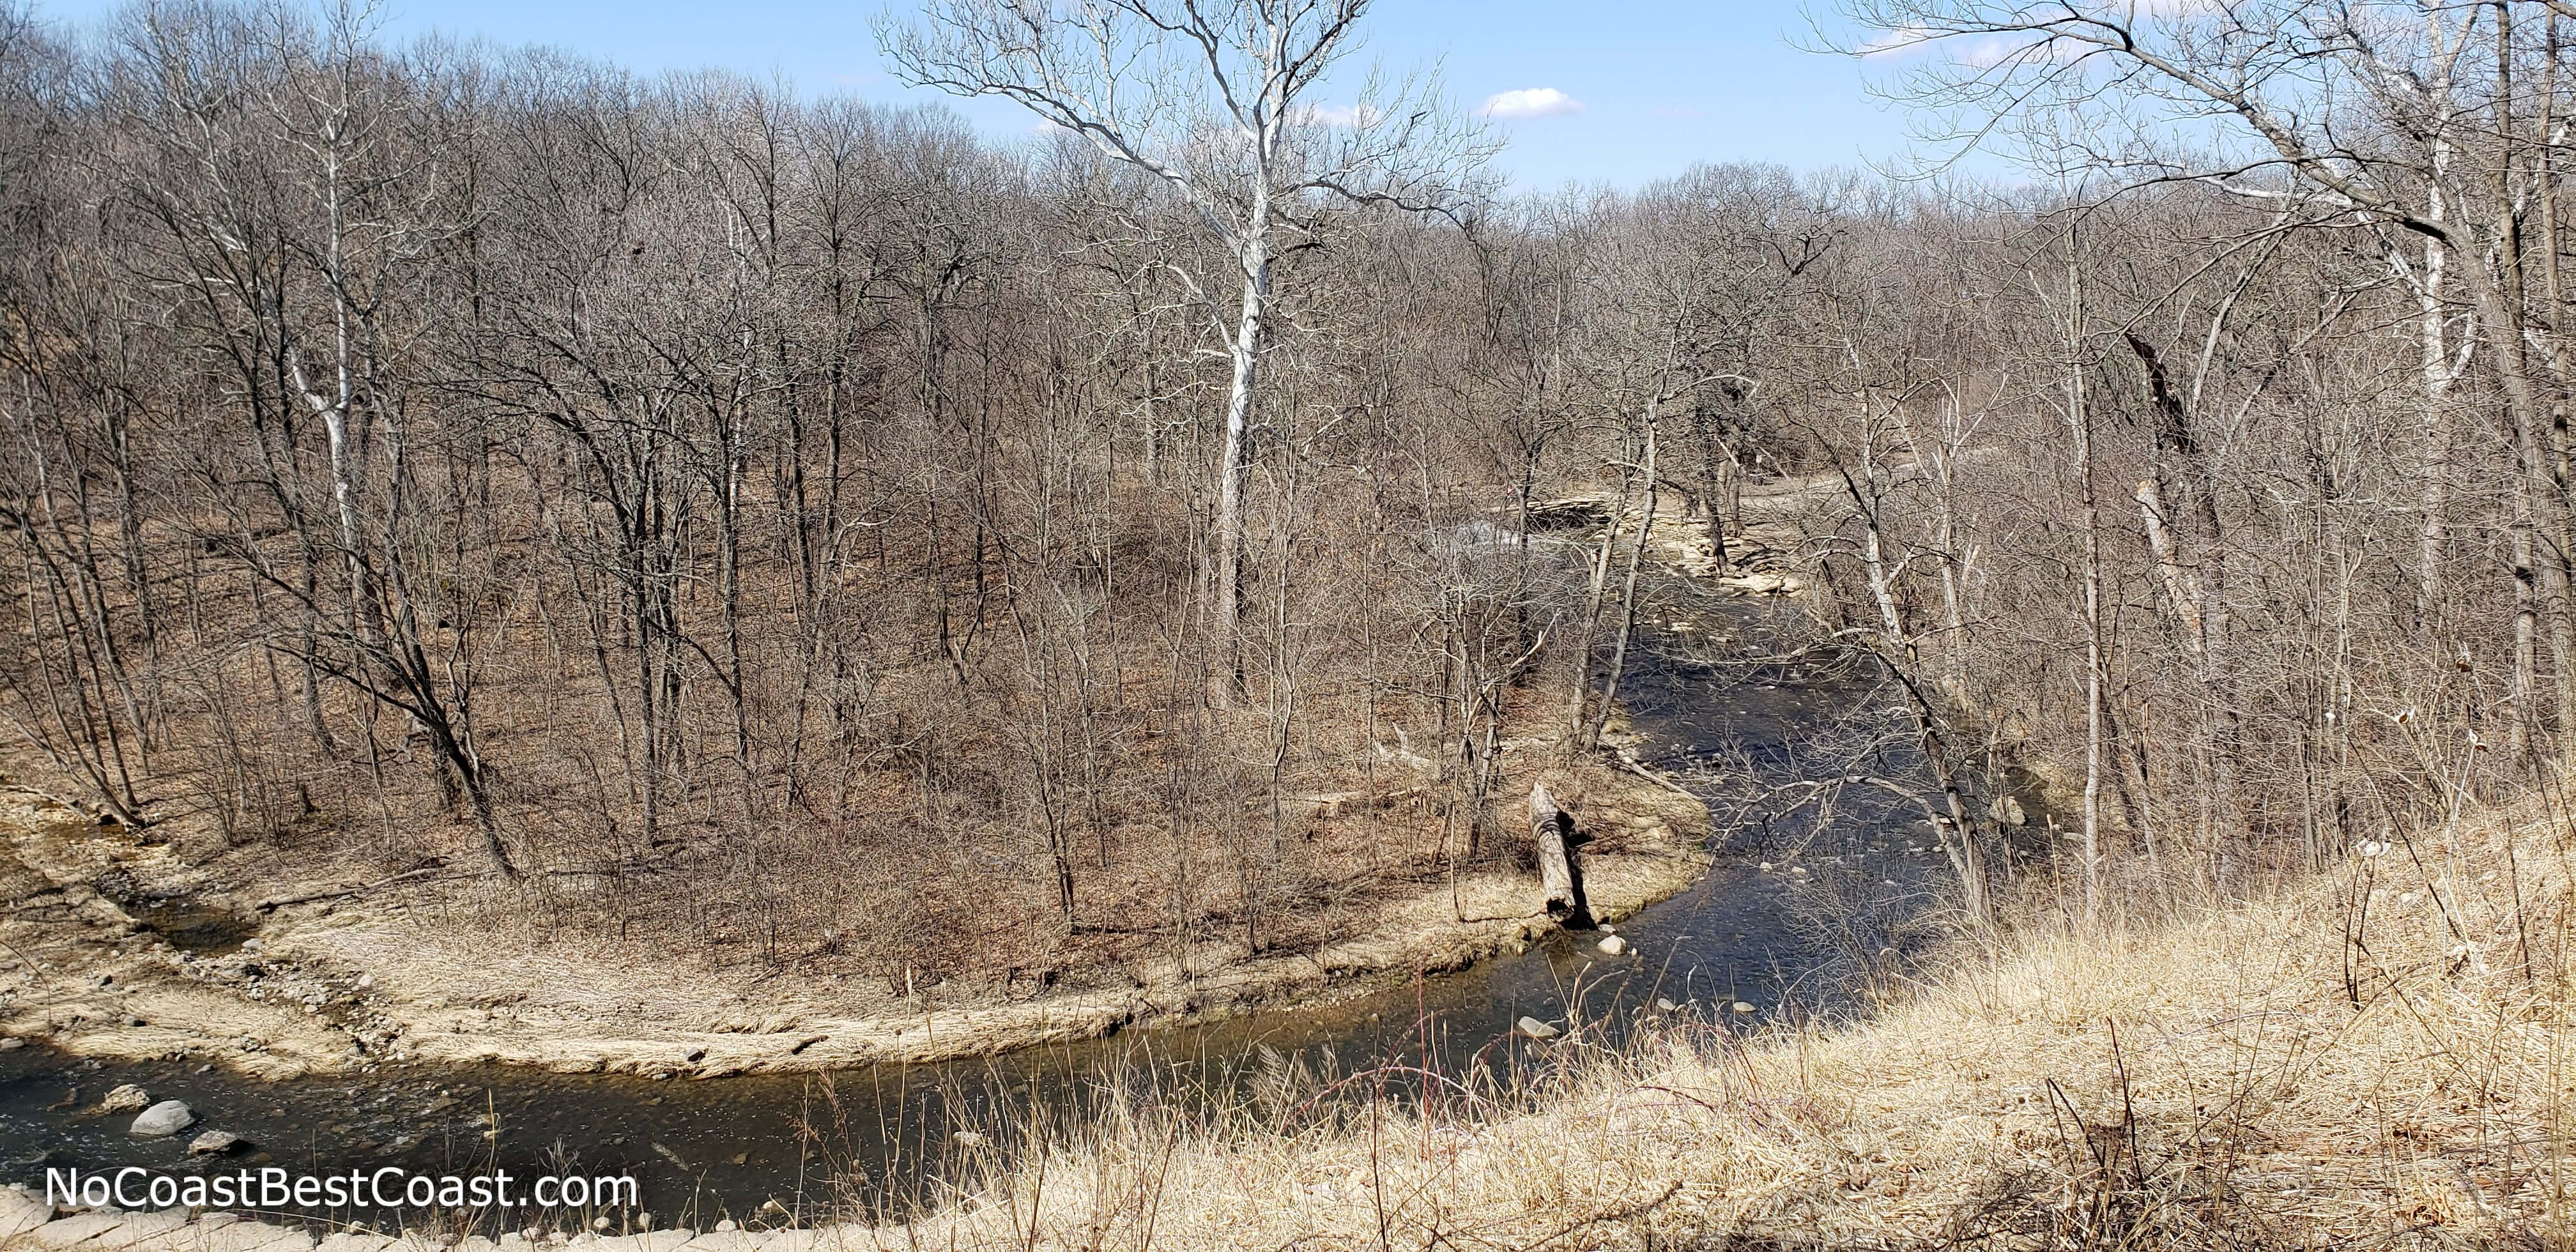 An oxbow in Sawmill Creek and the falls faintly visible between the trees